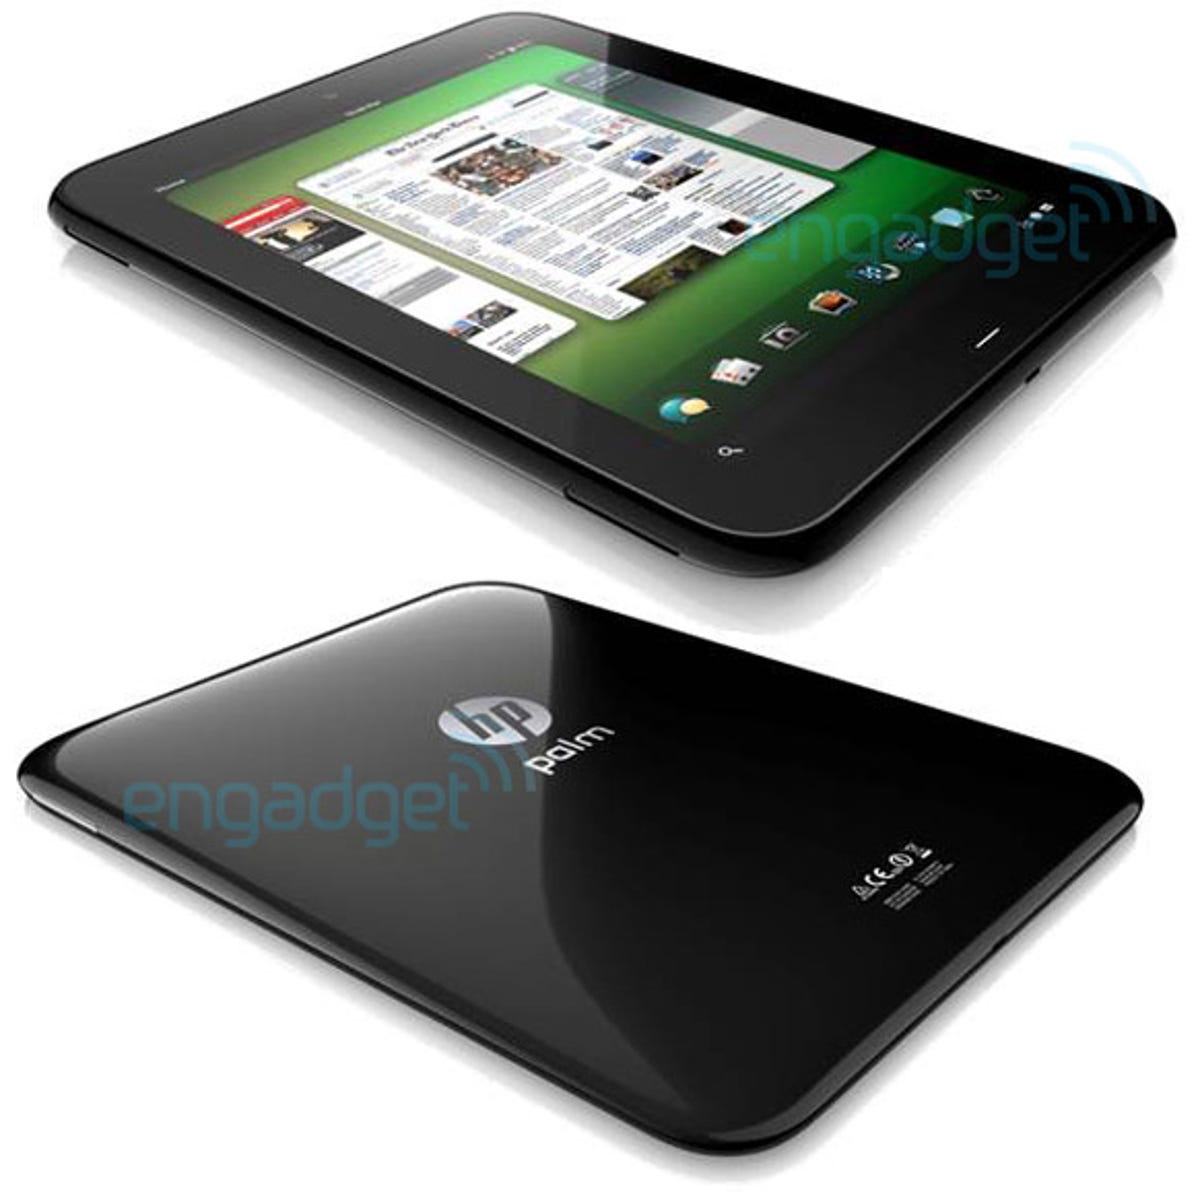 The upcoming webOS-based HP tablet?